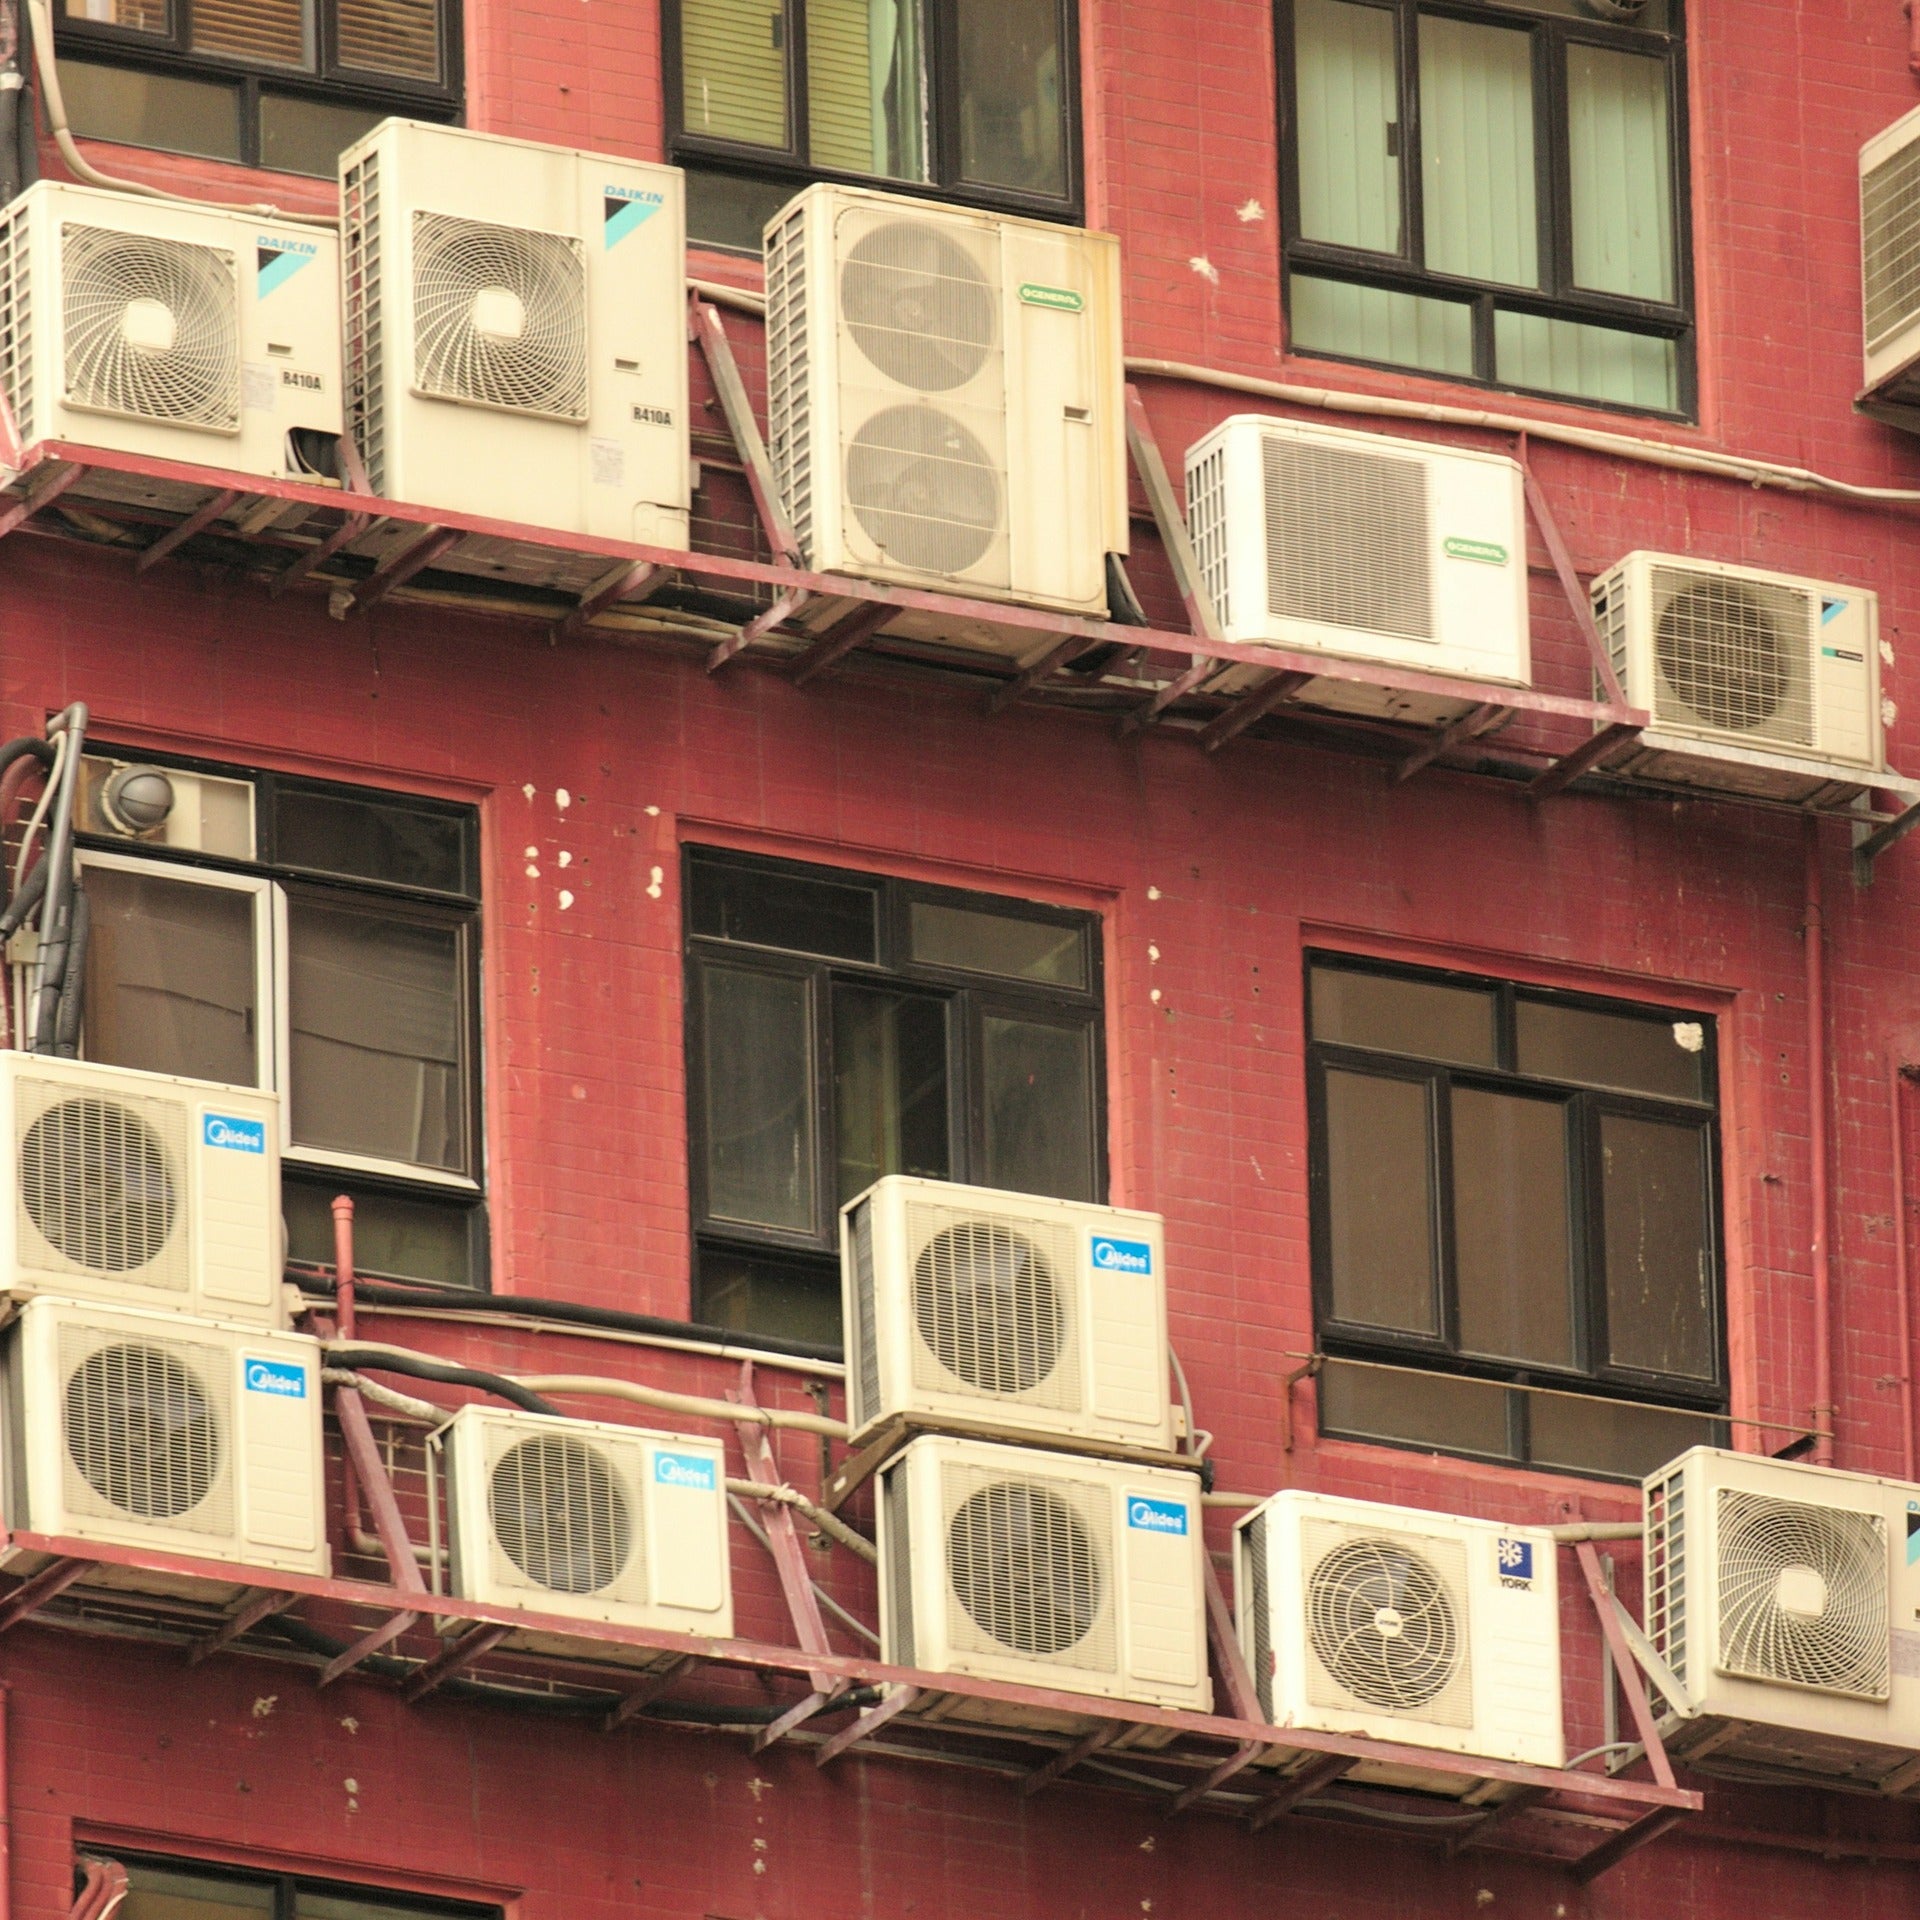 Multiple building cooling fan systems on the outside of a red building